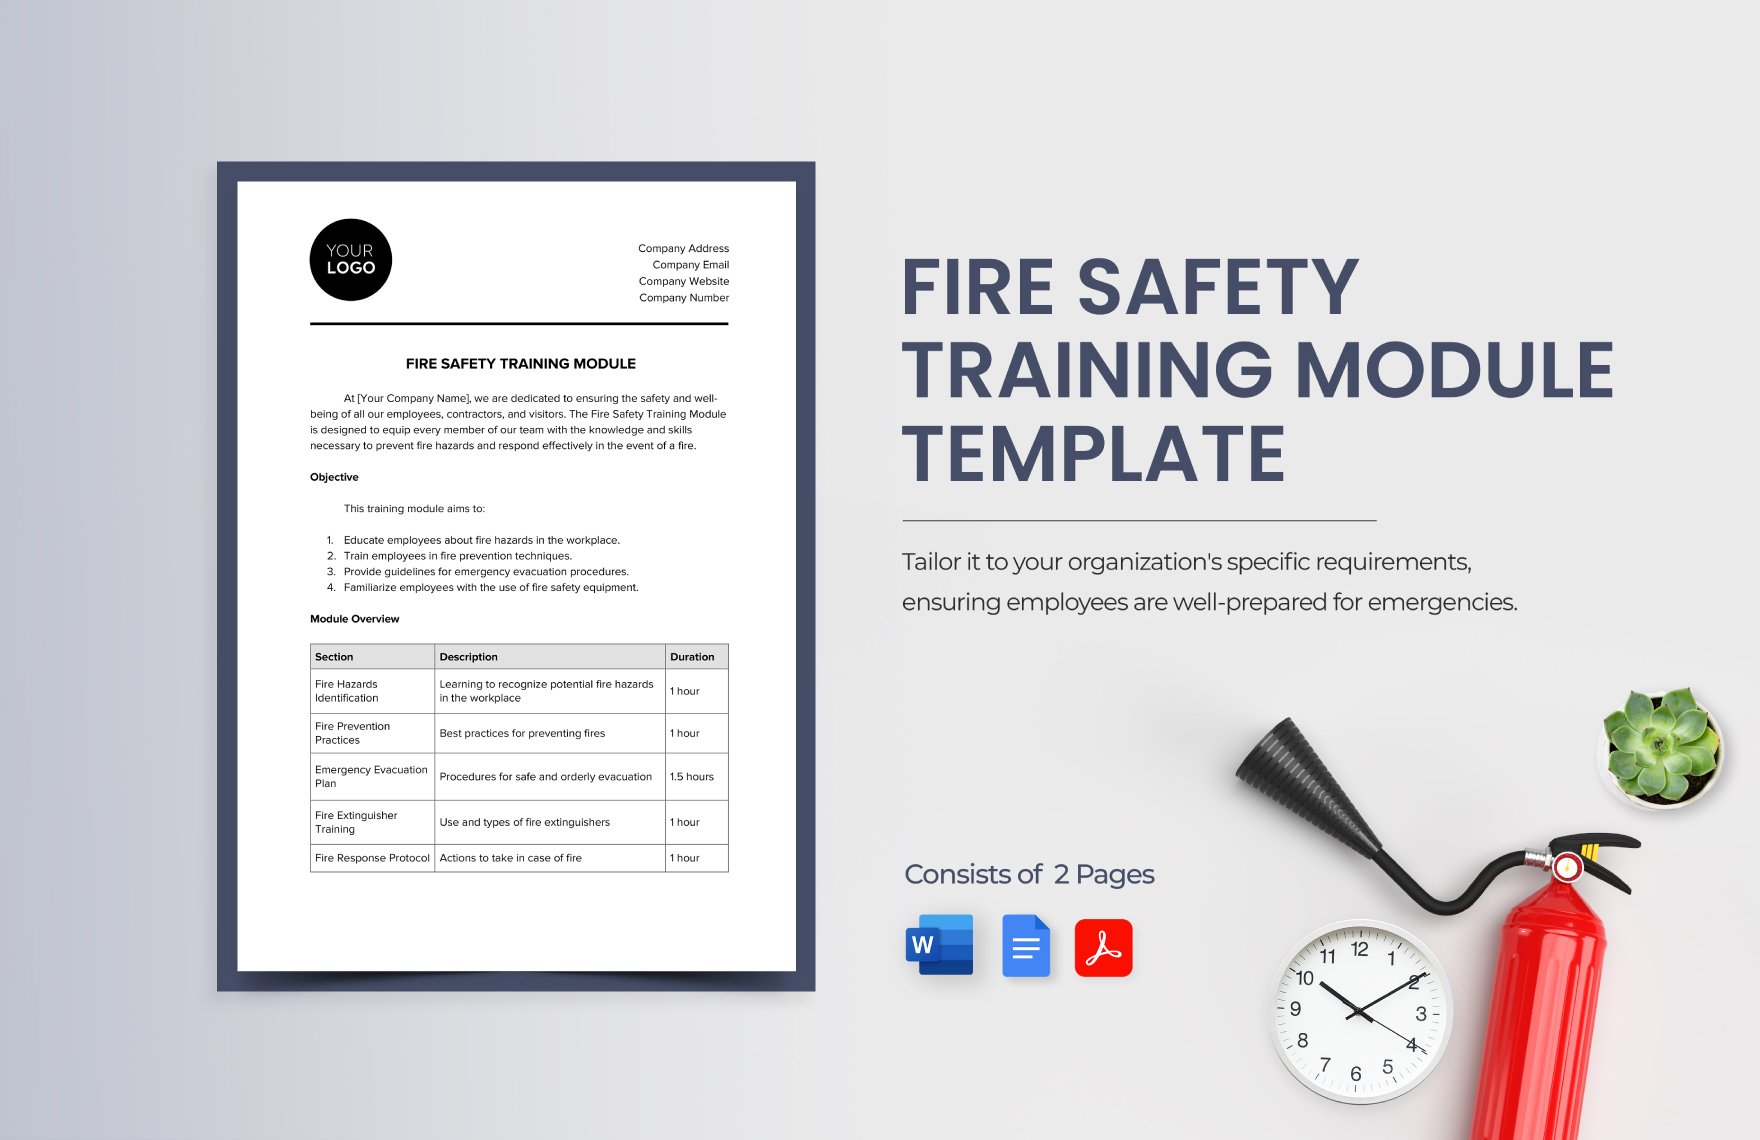 Fire Safety Training Module Template